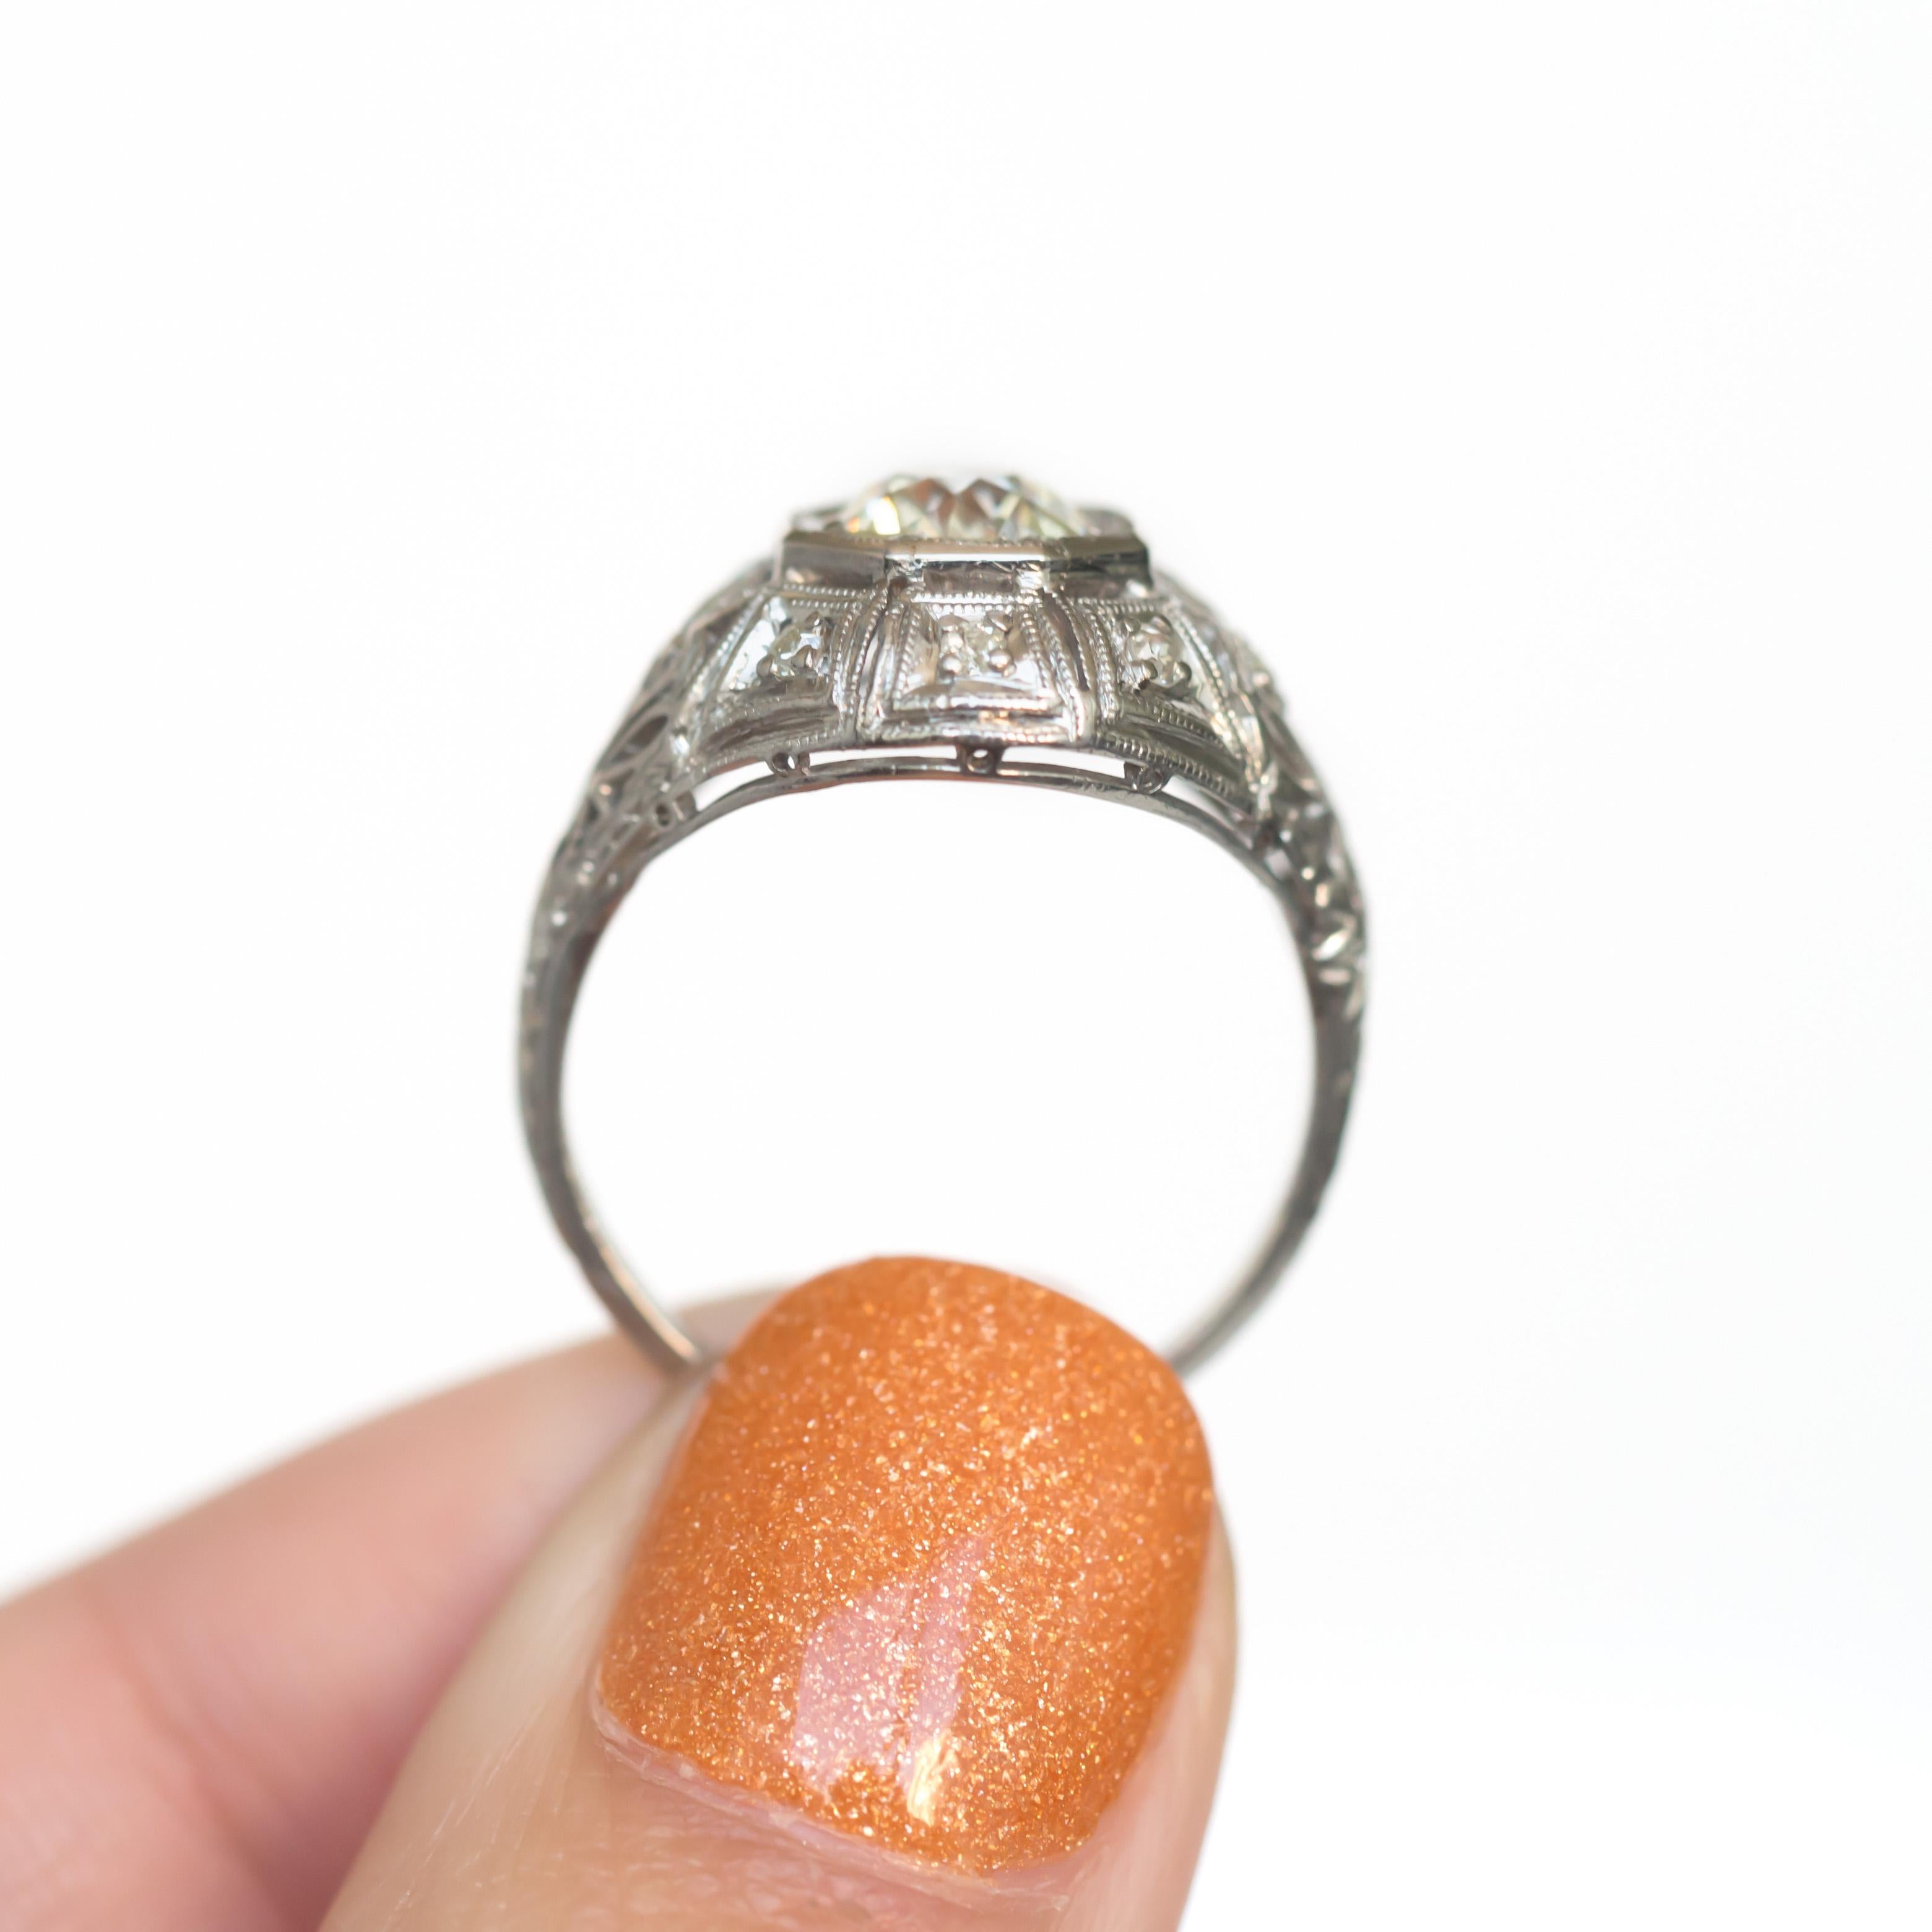 GIA Certified 1.01 Carat Diamond Engagement Ring In Good Condition For Sale In Atlanta, GA